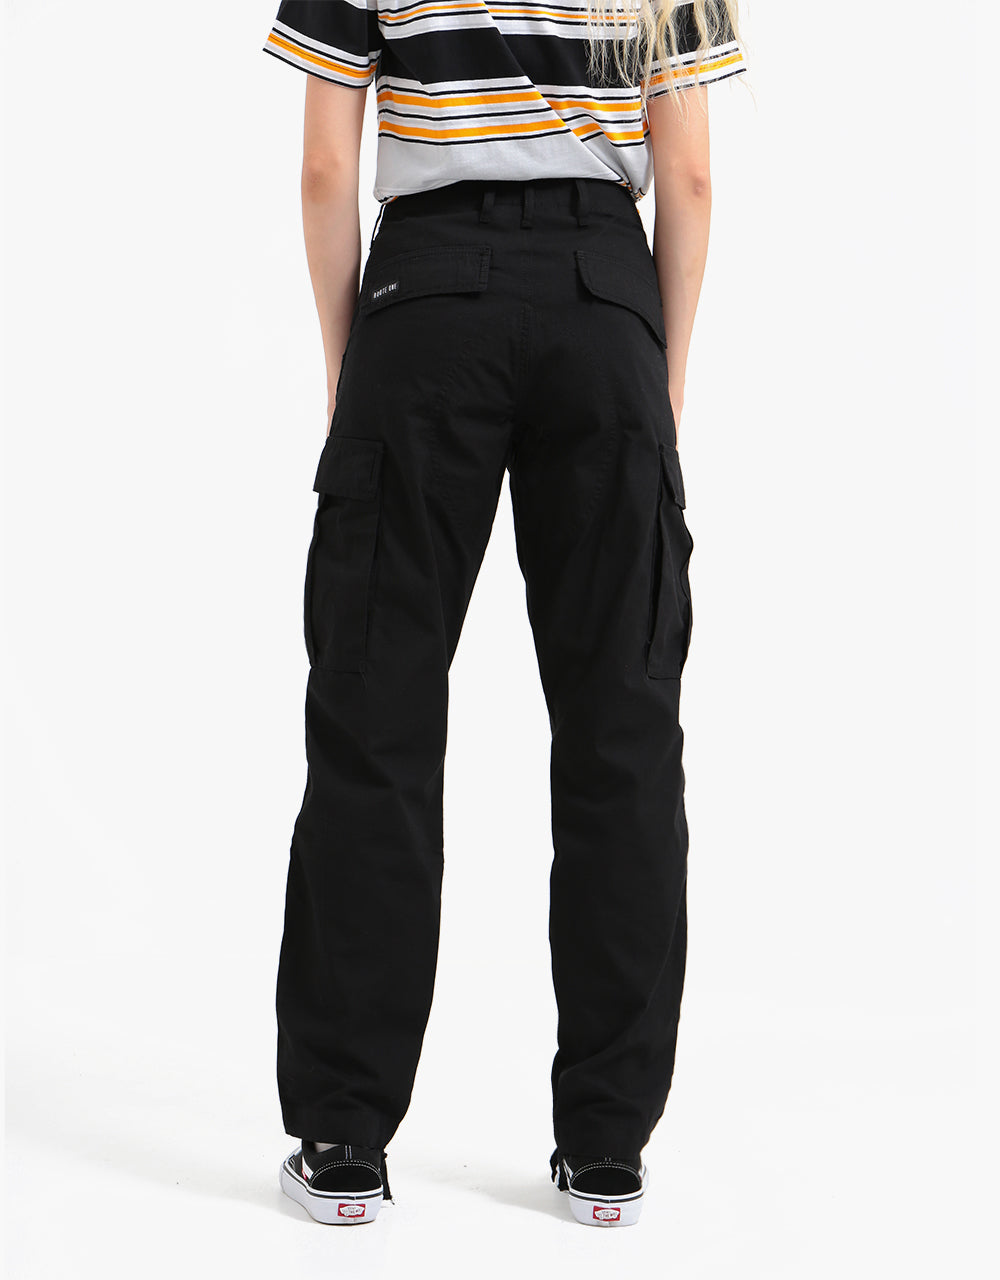 Straight Ultimate Tech Built-In Flex Cargo Pants | Old Navy